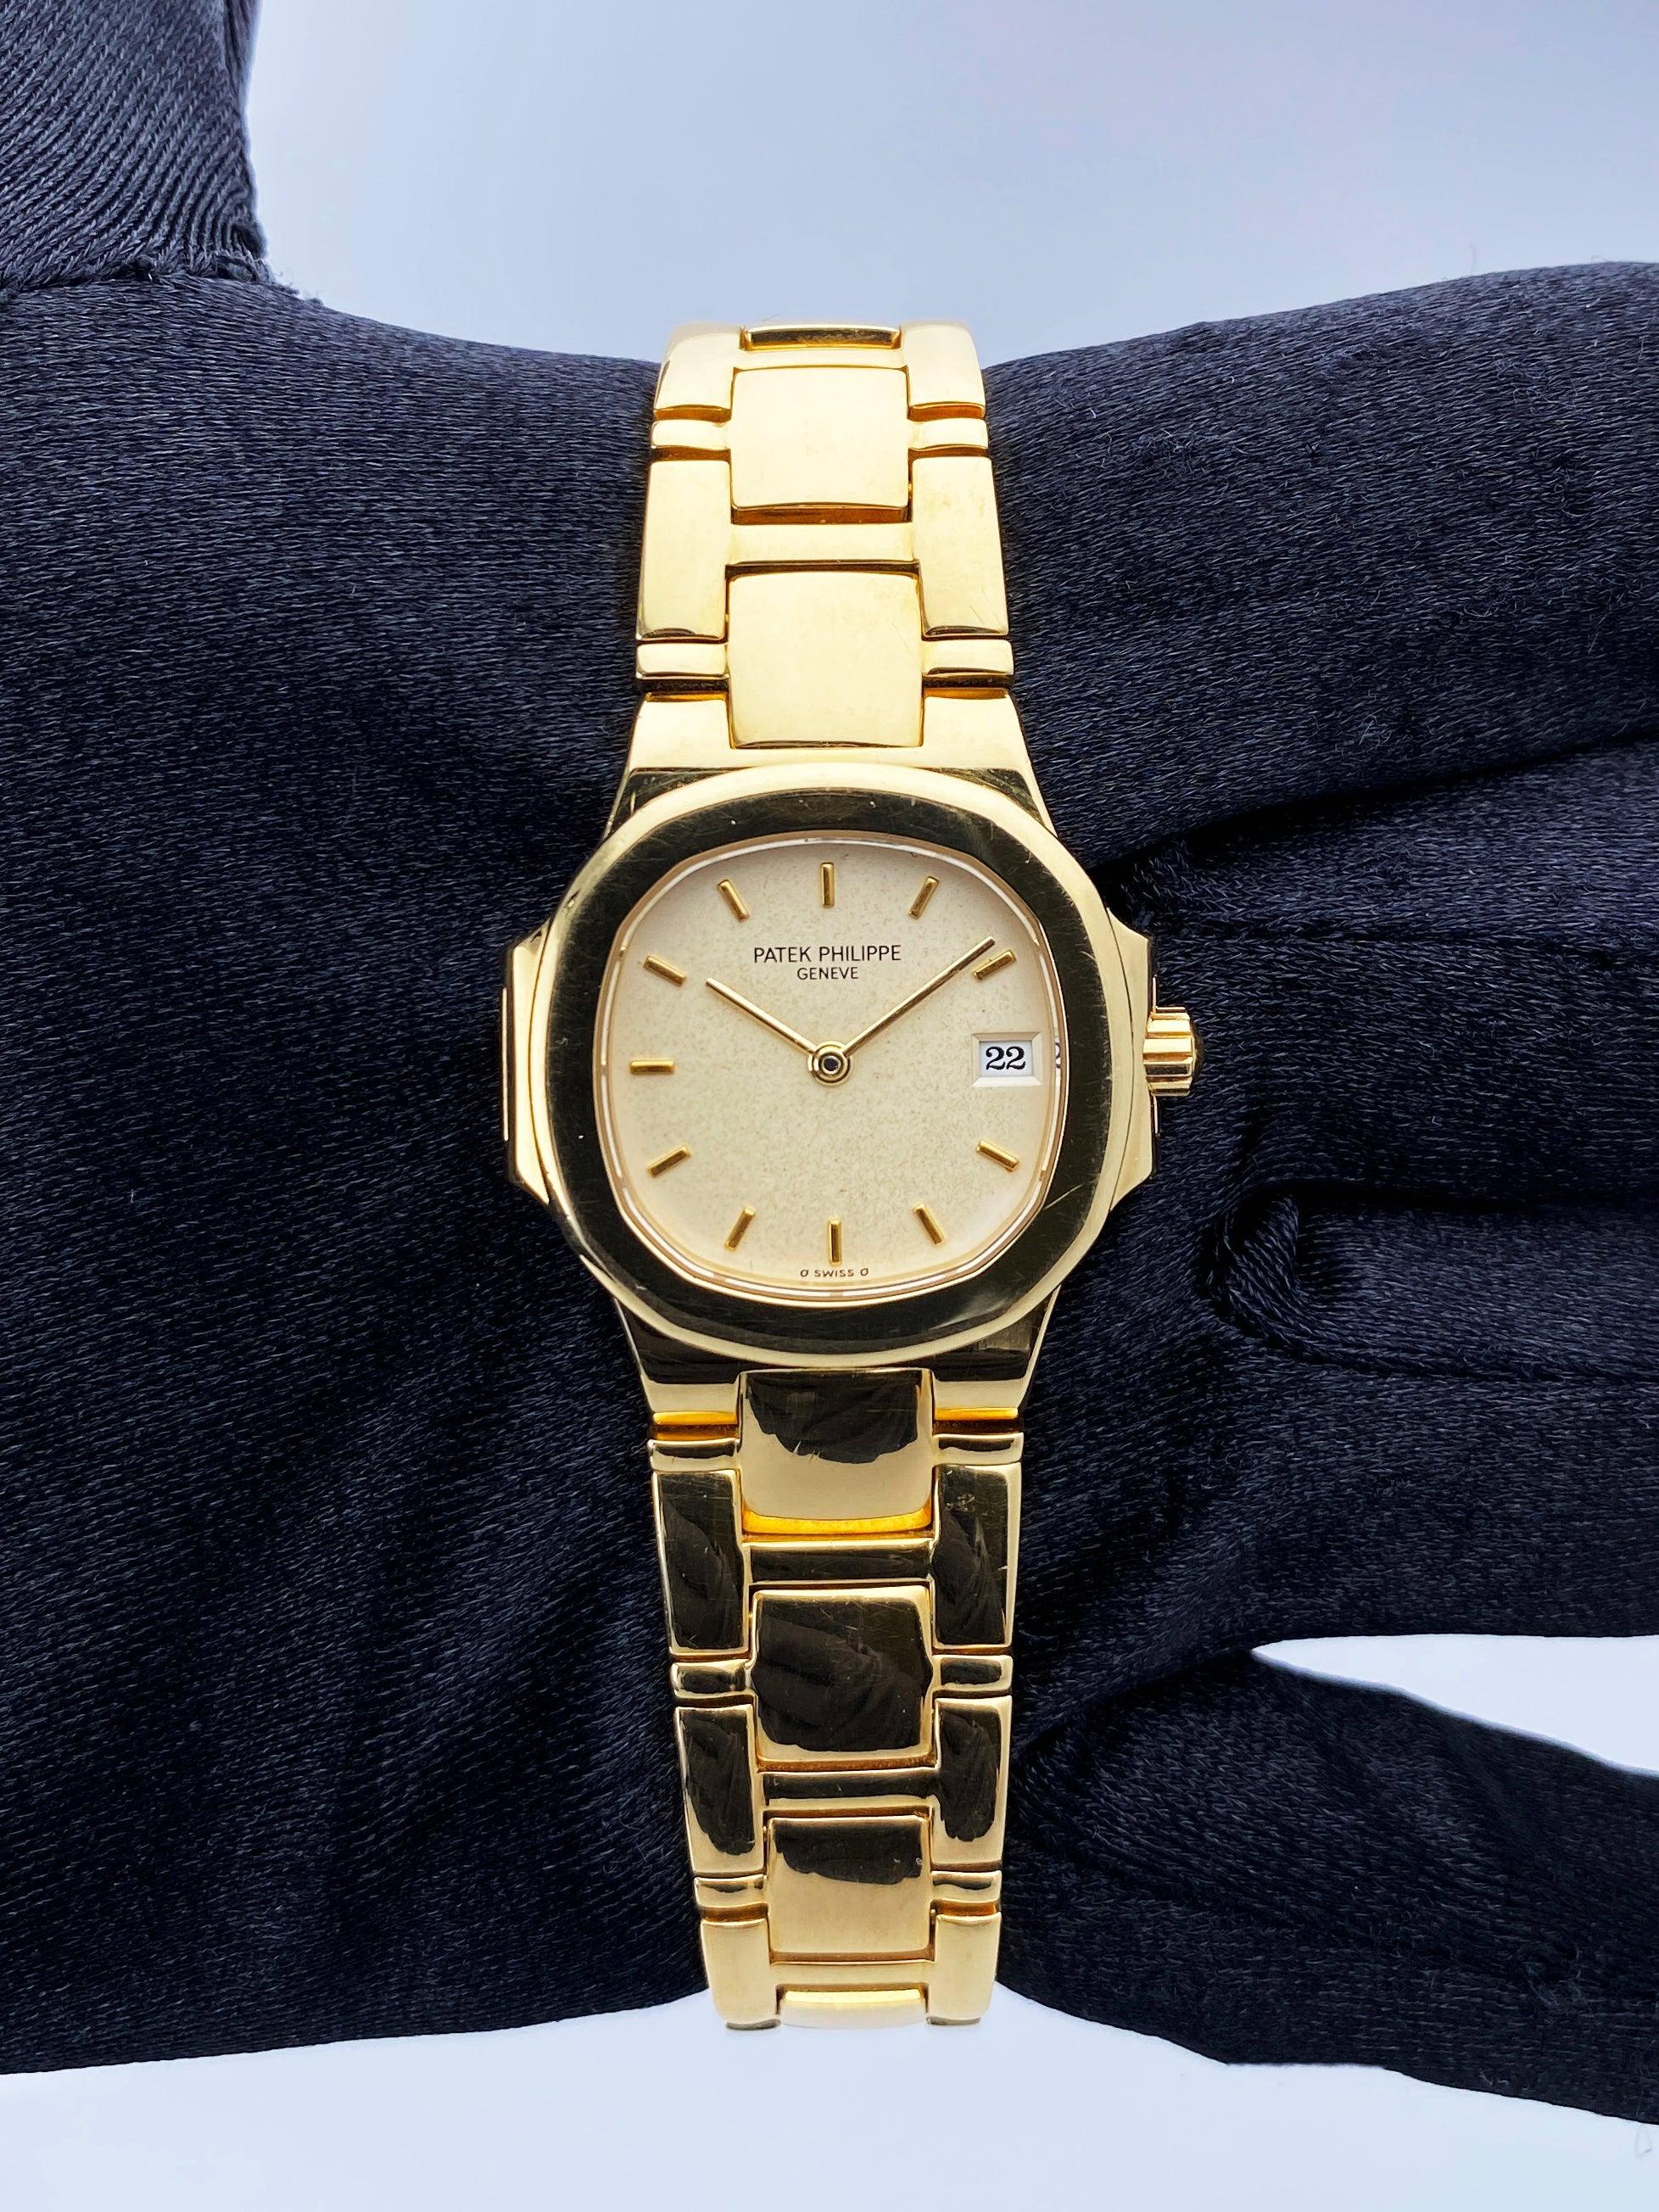 Patek Philippe Nautilus 4700 Ladies Watch. 27mm 18K yellow gold case with 18K yellow gold smooth bezel. Cream dial with gold hands and index hour marker. Date display at 3 o'clock position. 18K yellow gold bracelet with fold over clasp with safety.